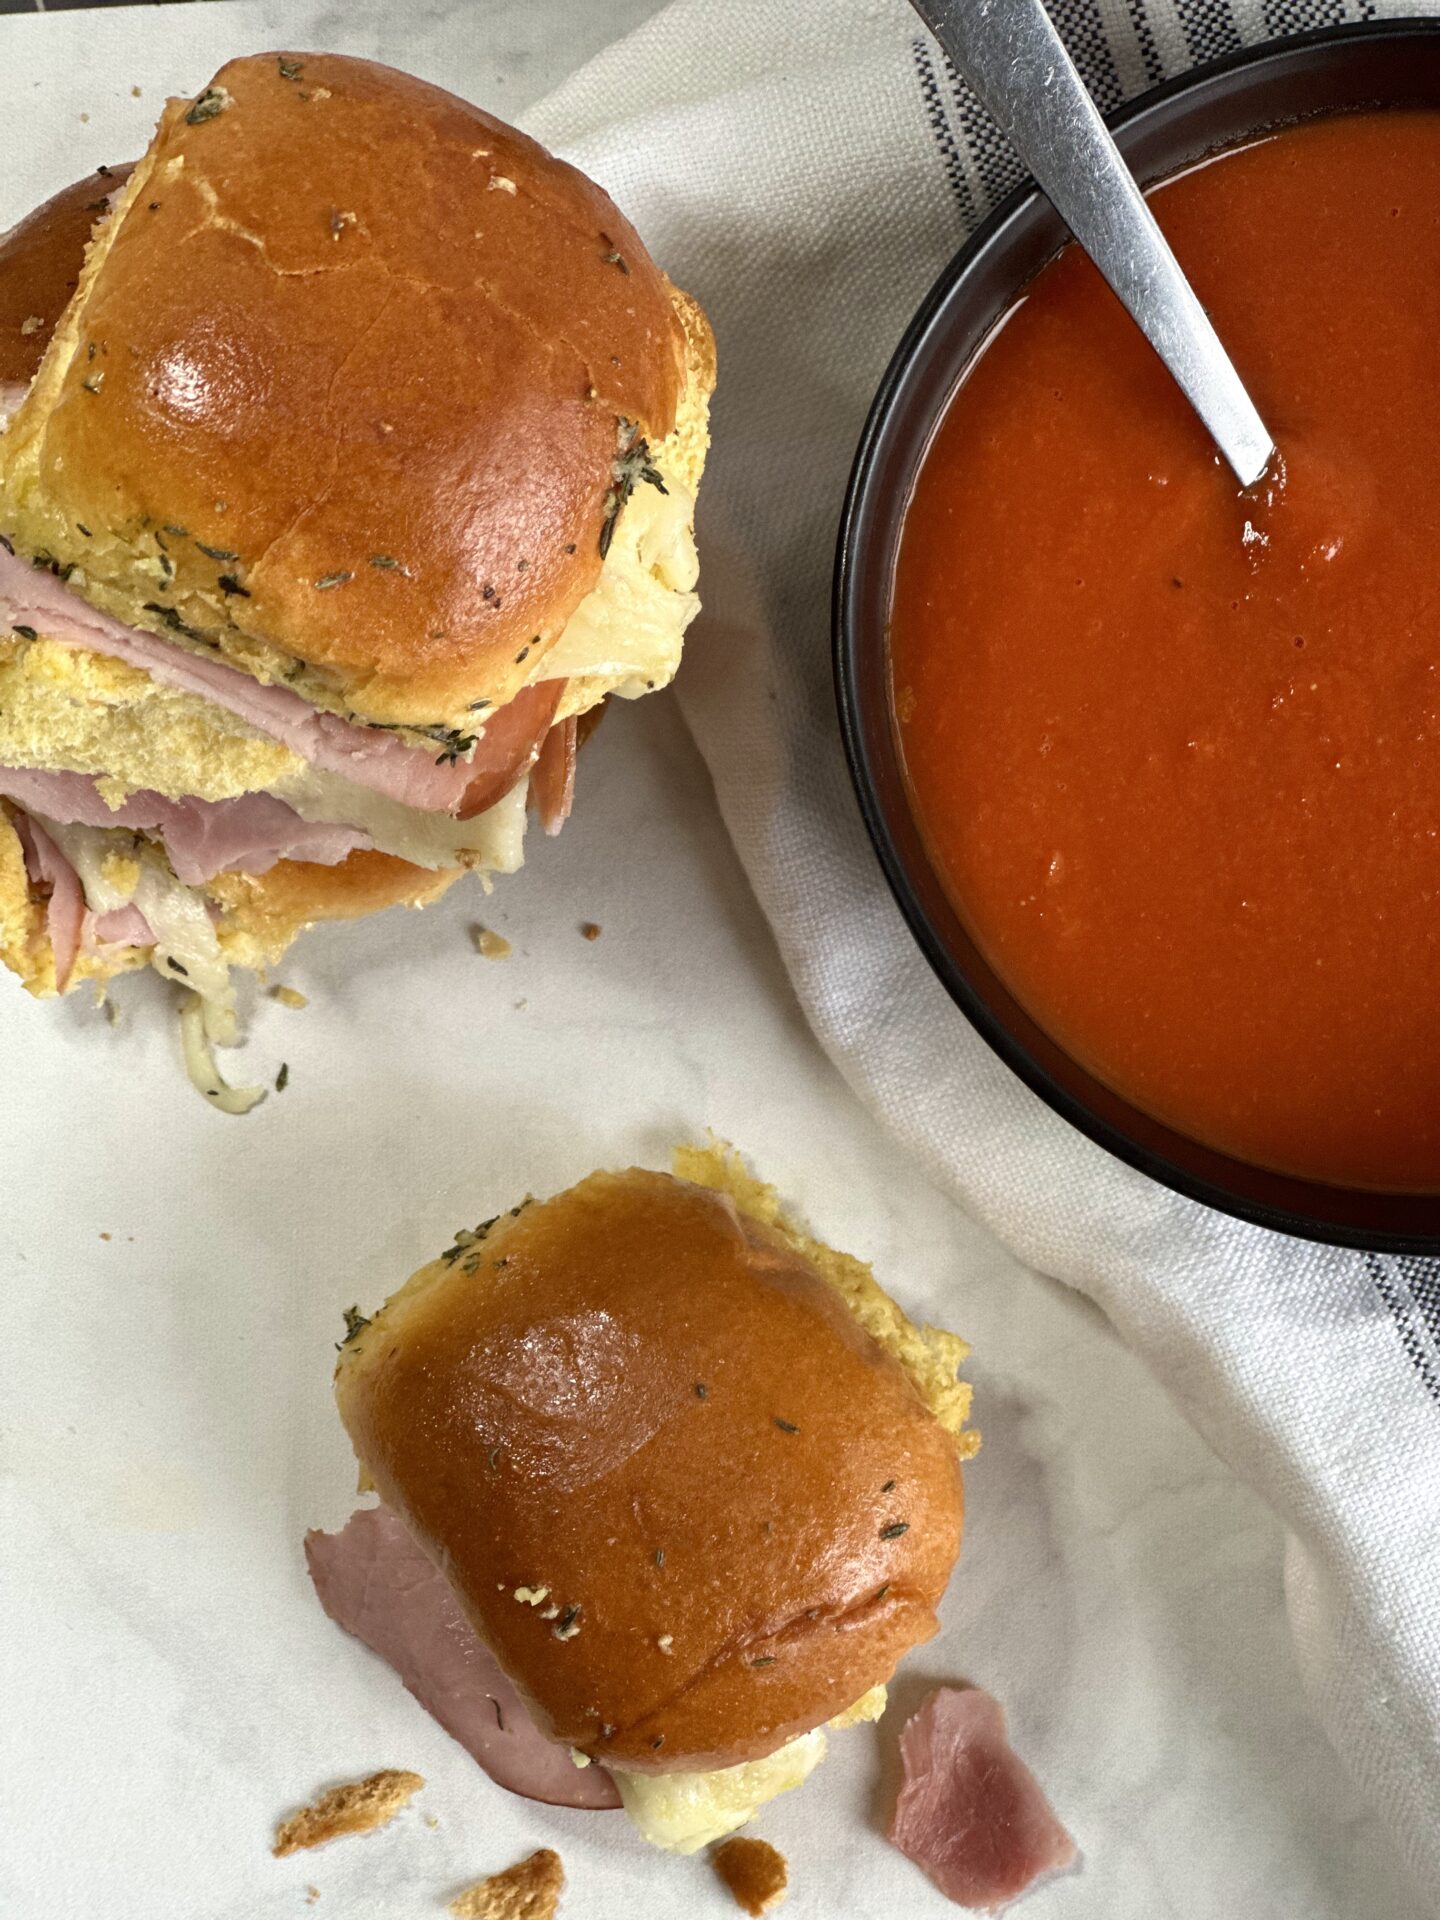 Hot ham and cheese sliders on golden buns seen from above with a bowl of homemade tomato soup.